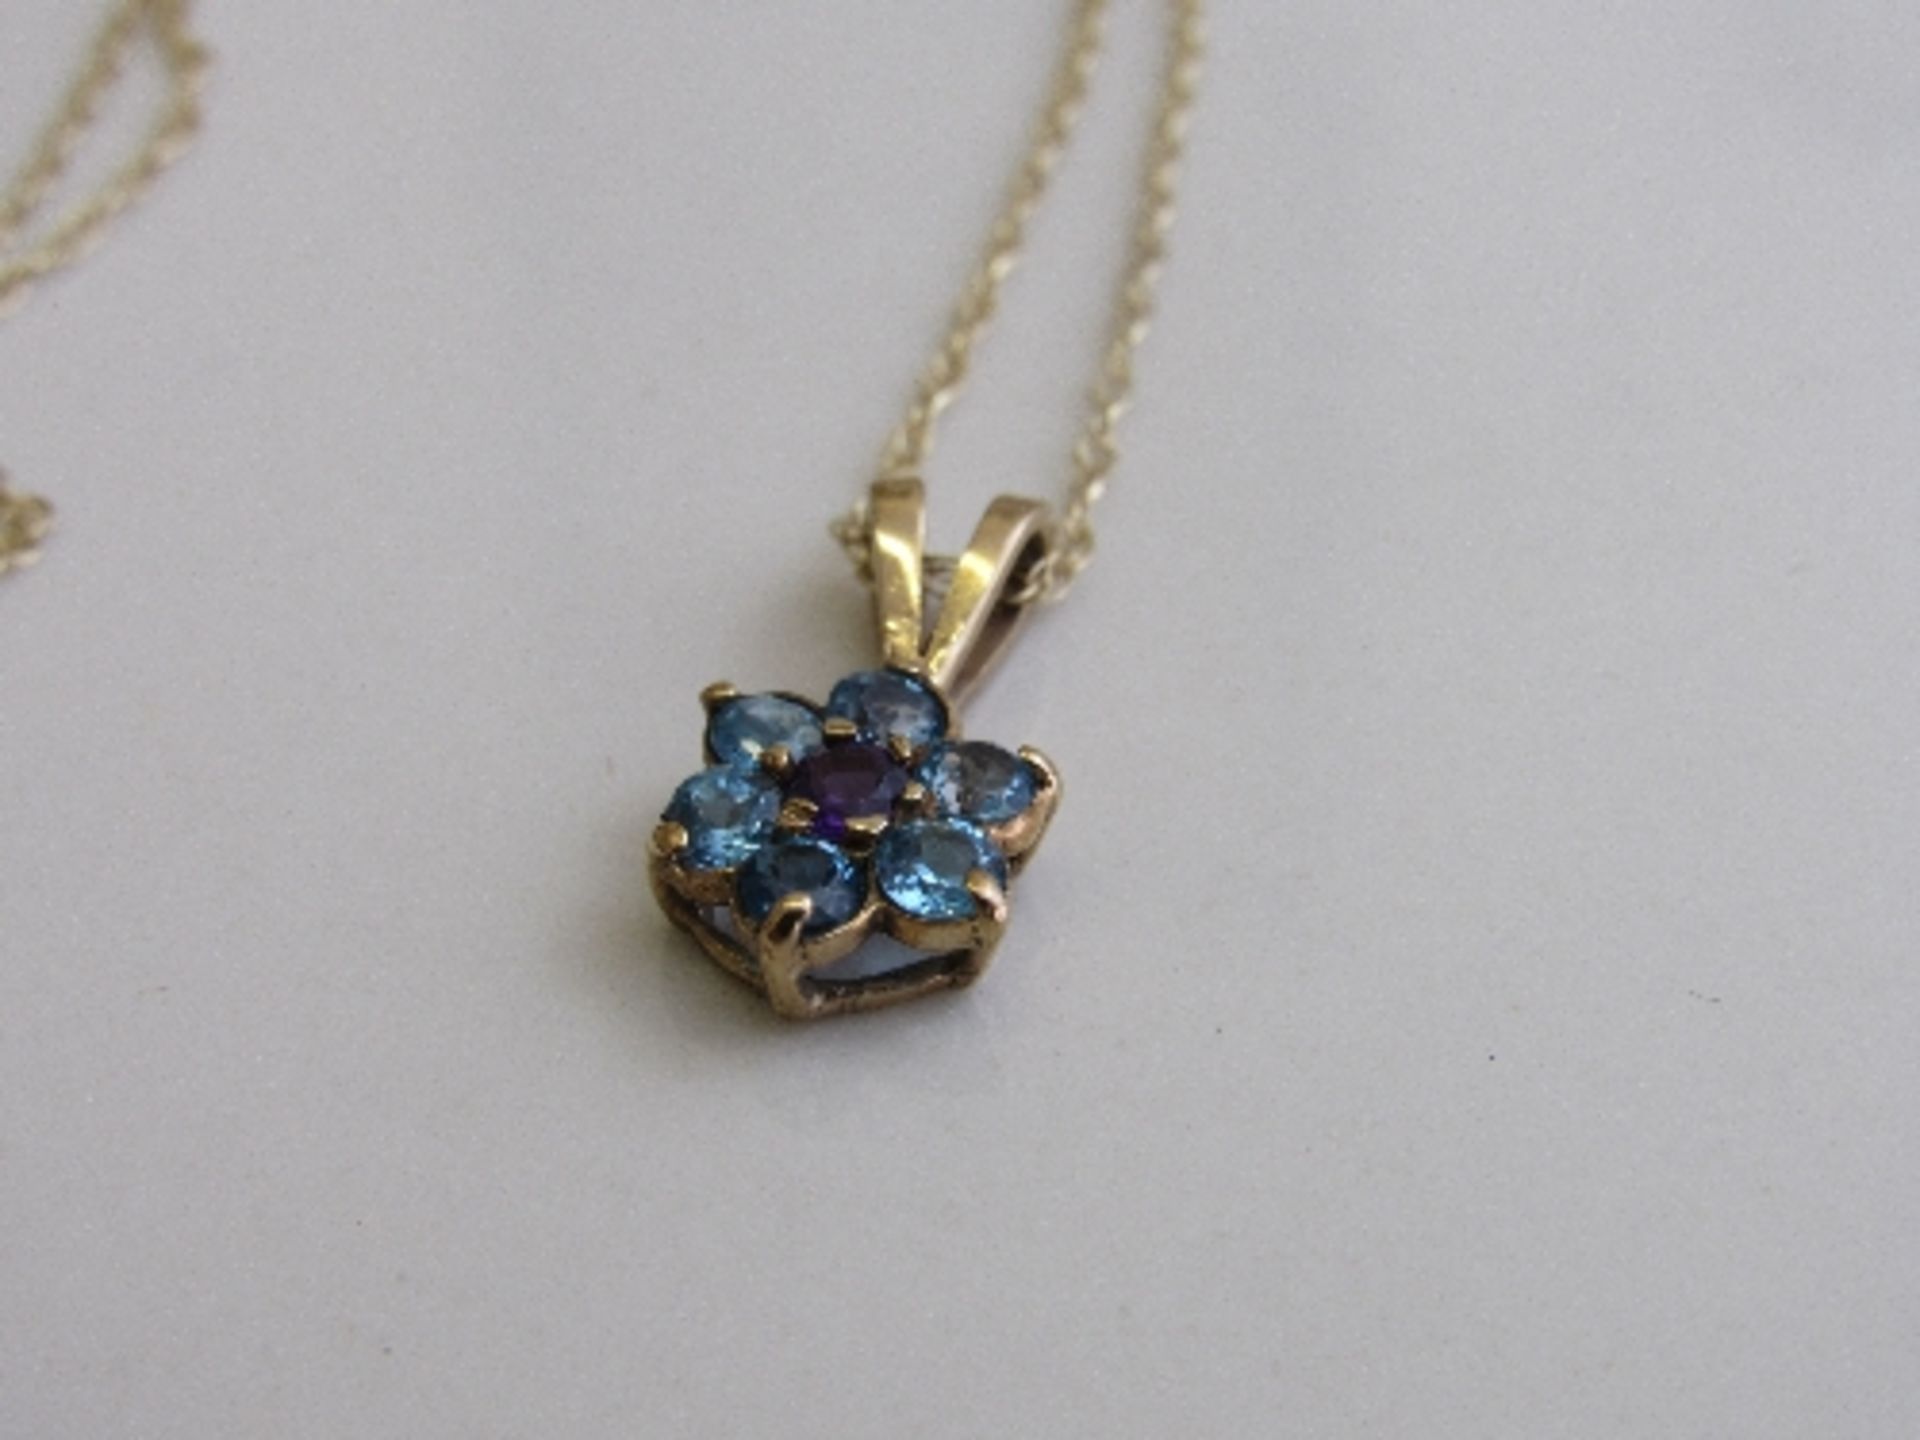 9ct gold, purple & pale blue stone flower pendant on 9ct gold chain, weight 1.9gms. Estimate £20-30 - Image 3 of 4